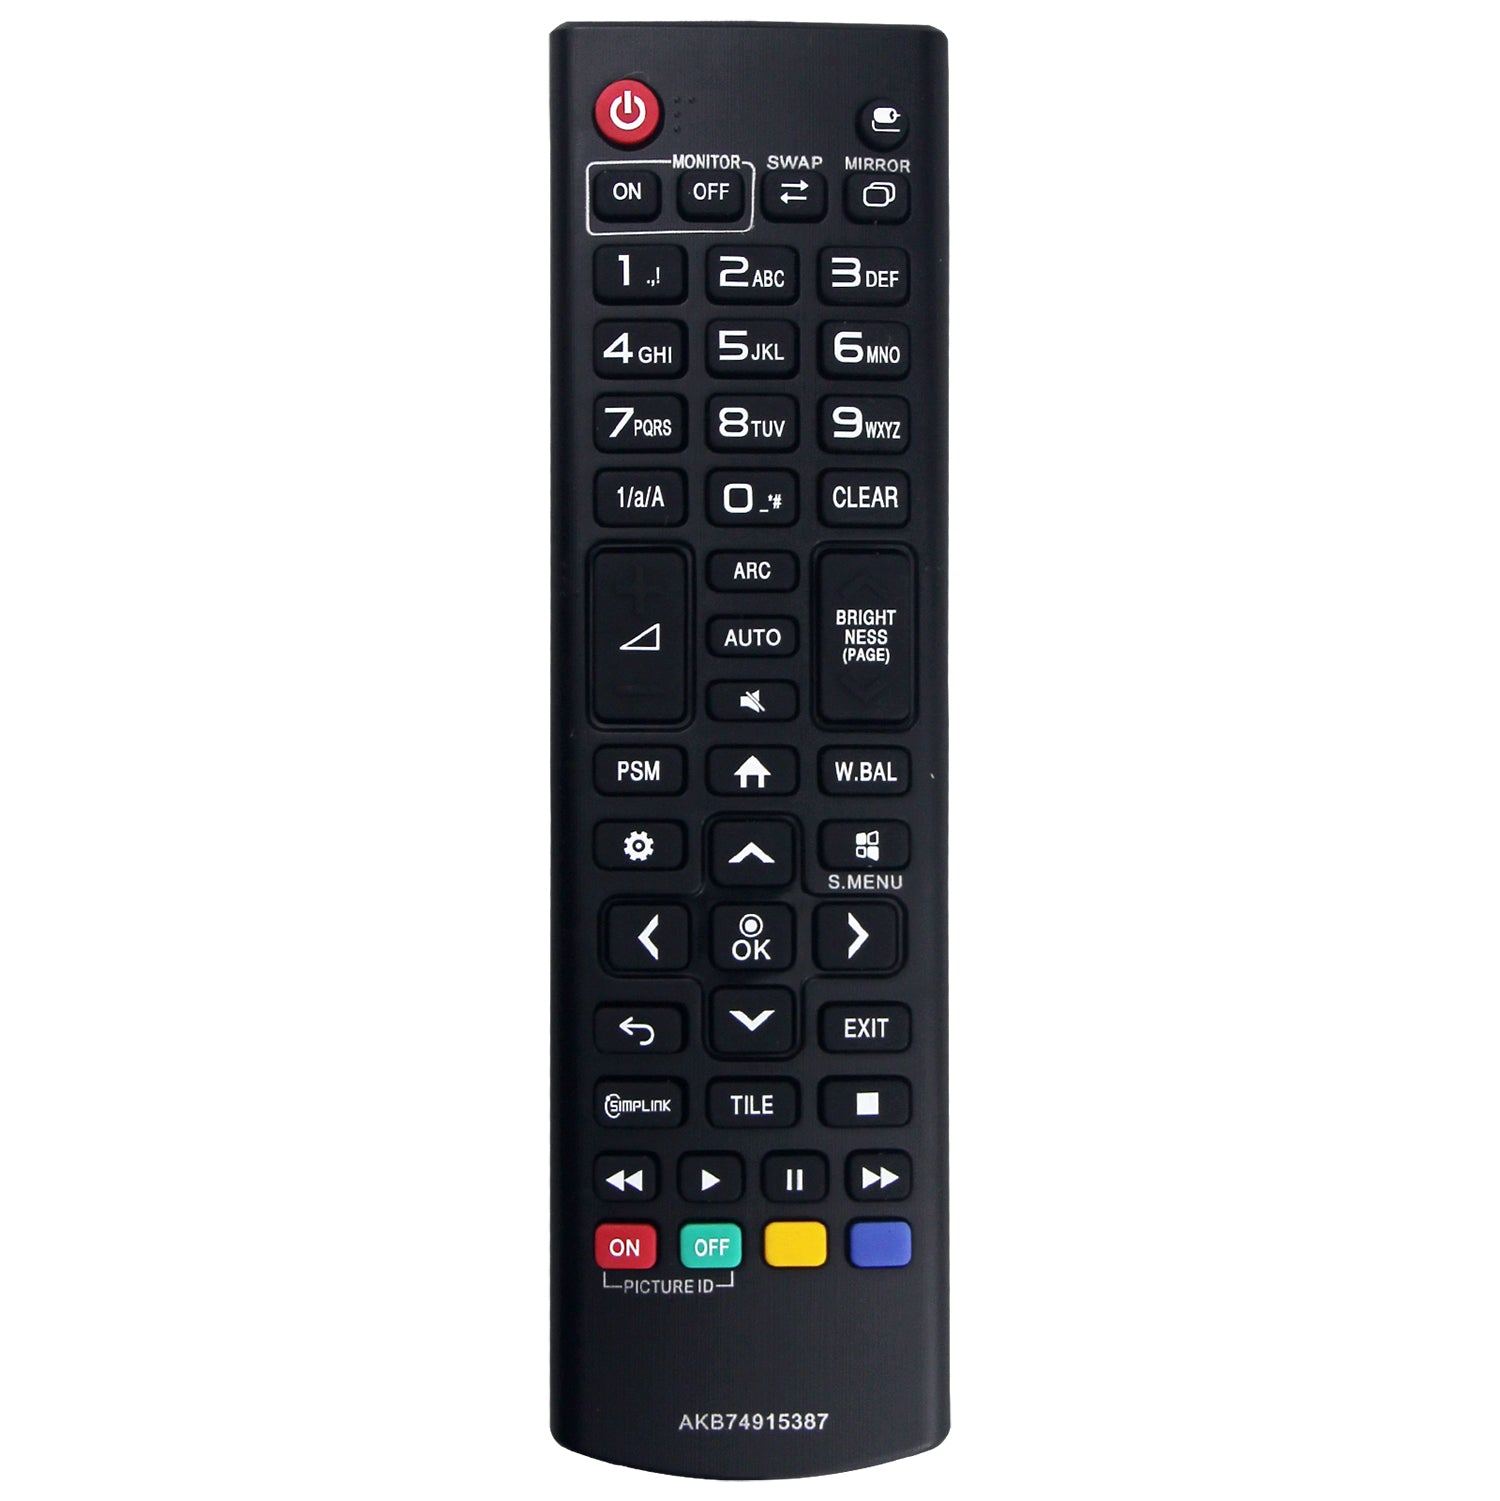 AKB74915387 Remote Control Replacement for Smart TV 7IN5400 42PN450B